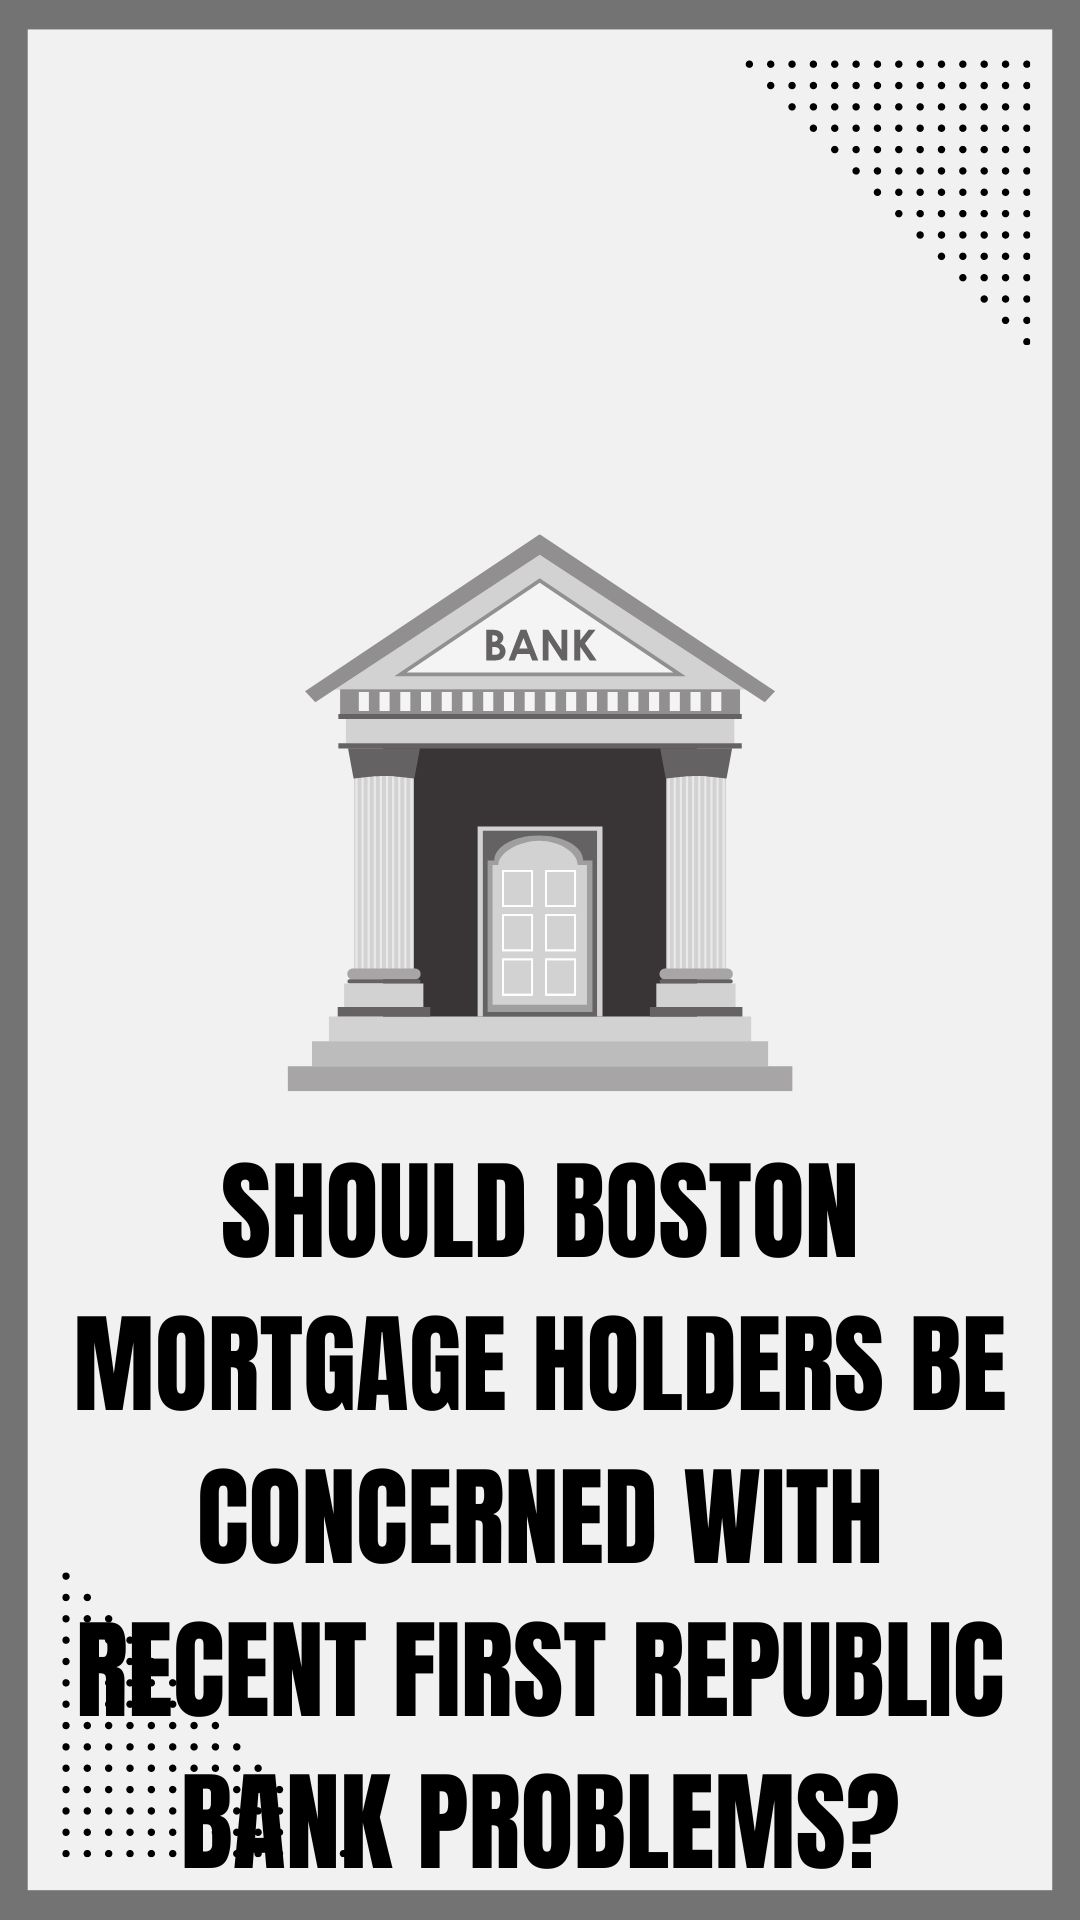 Should Boston Mortgage Holders Be Concerned with Recent First Republic Bank Problems?